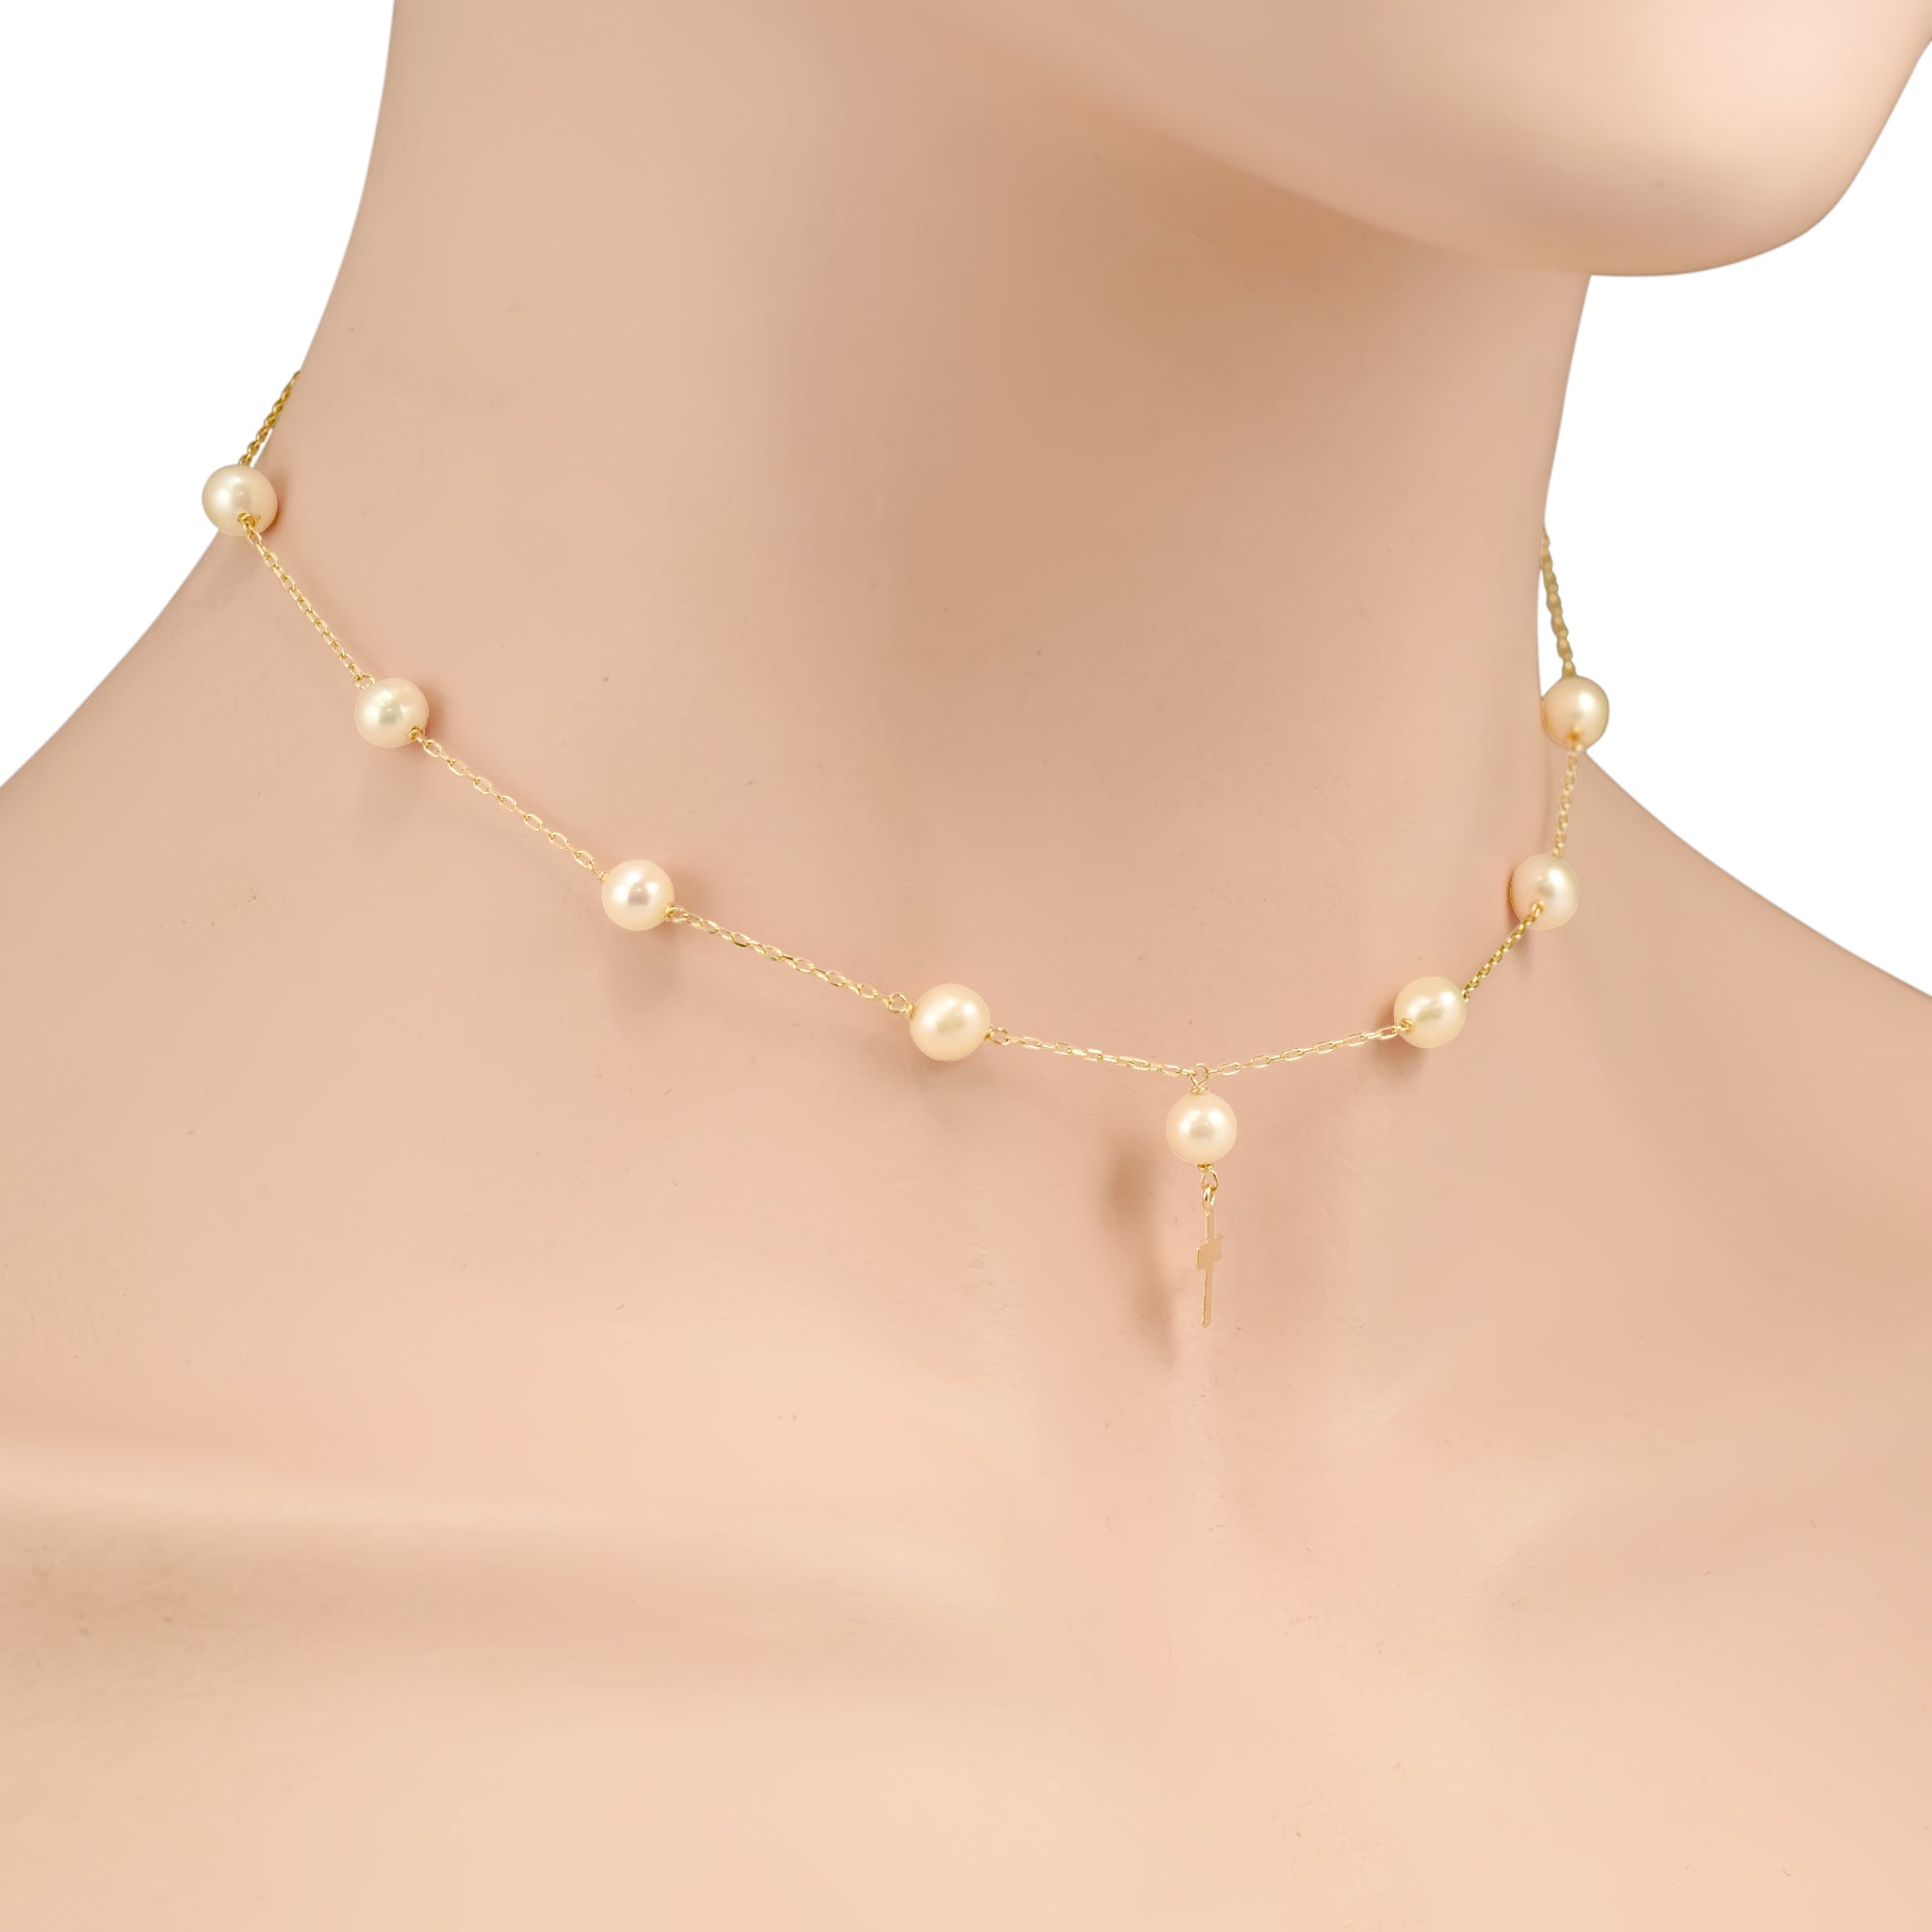 Childrens Freshwater Cultured Pearl Necklace in 14kt Yellow Gold (5-6mm pearls)